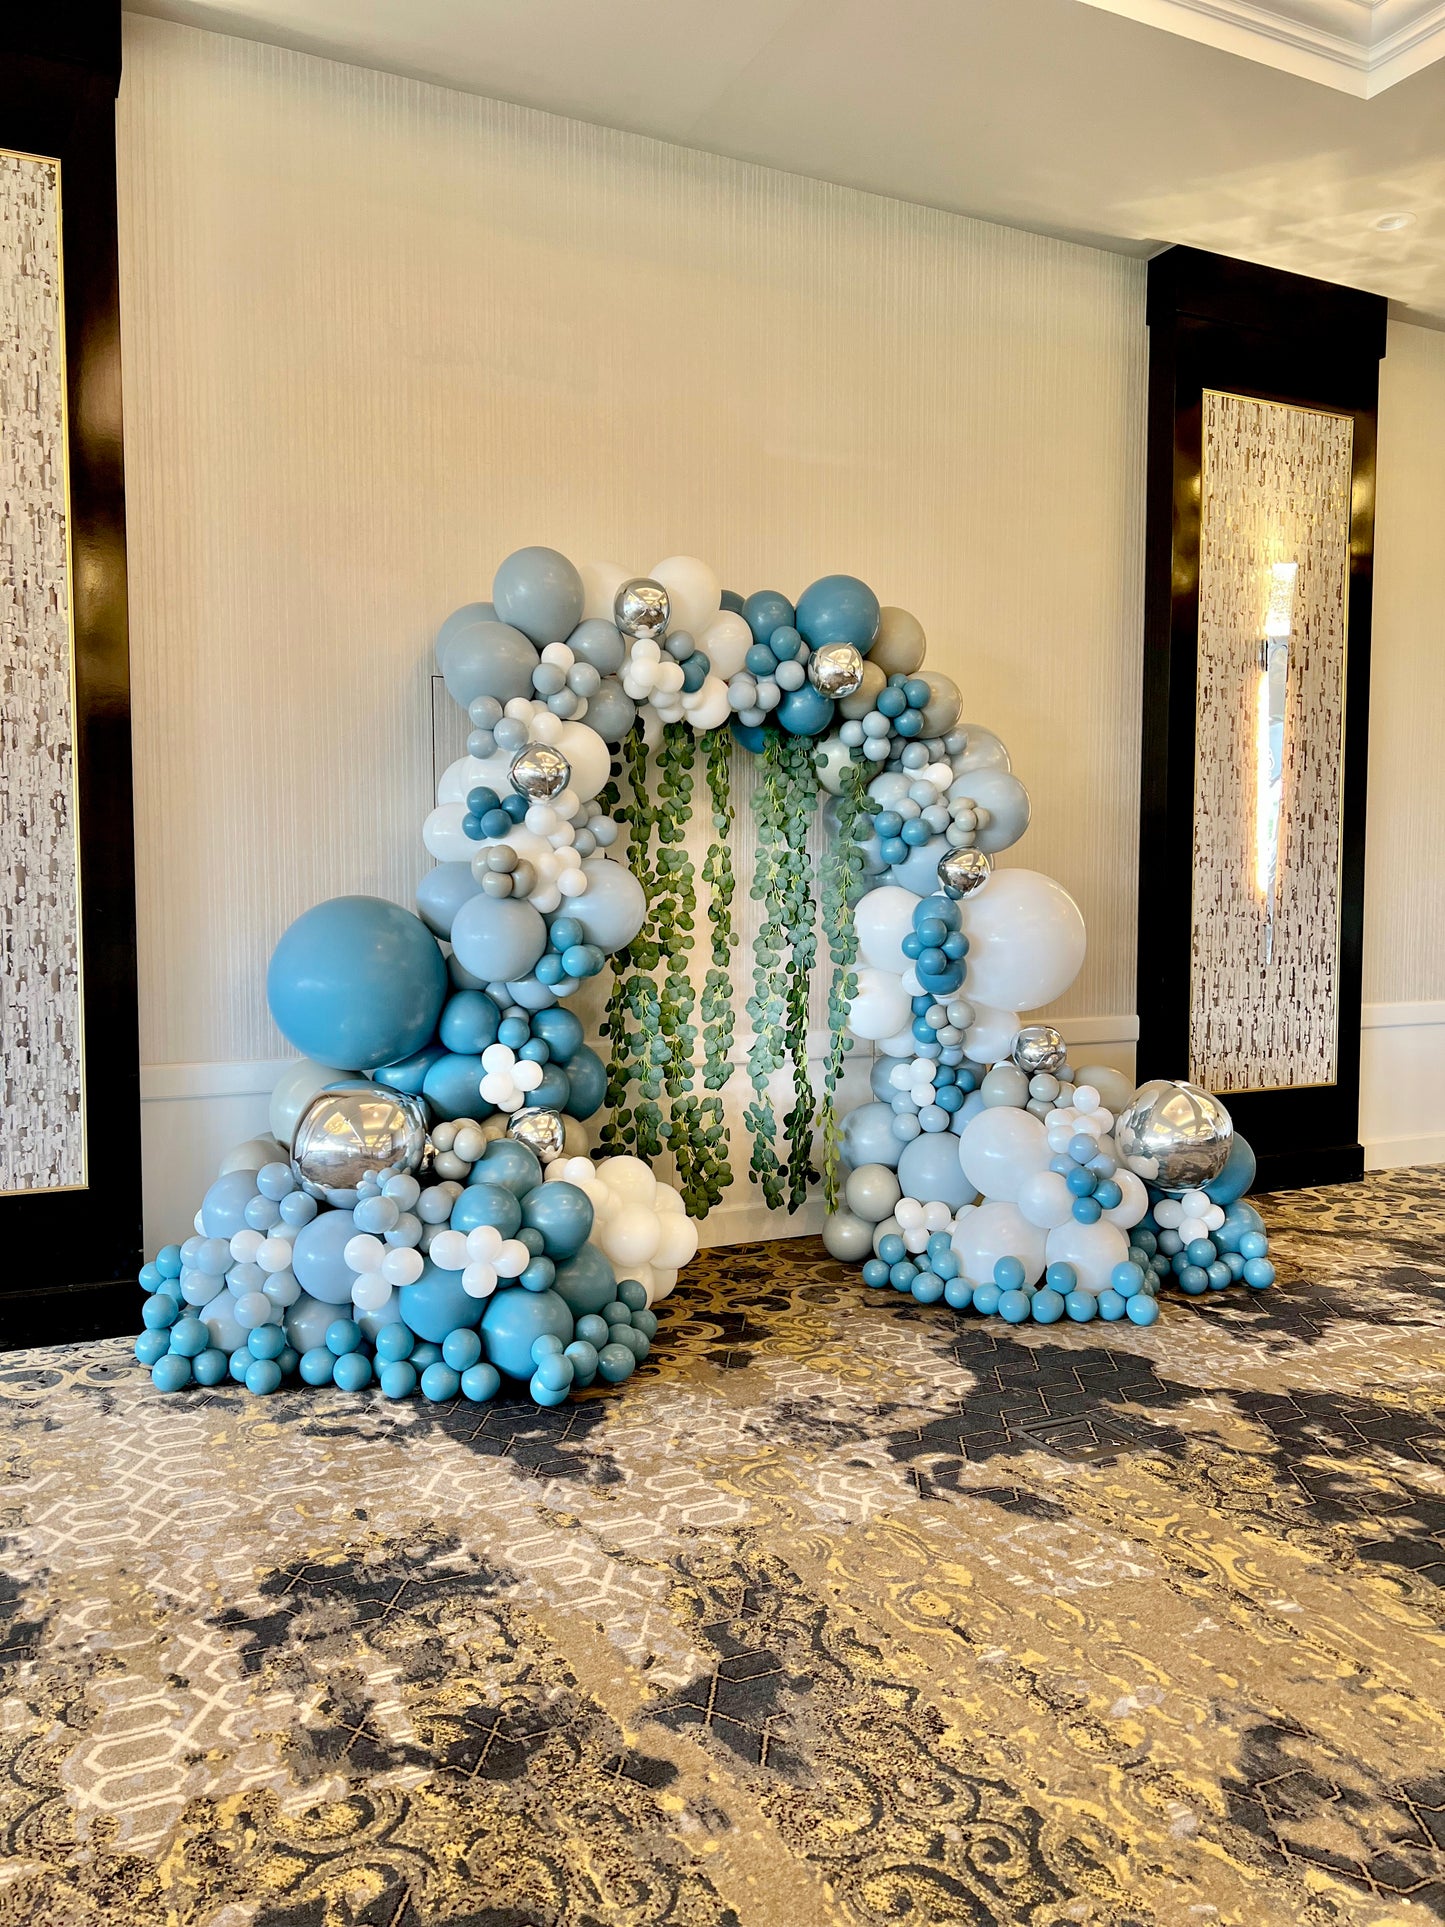 Event Booking with Jexsy Balloons - Full Balloon Arch